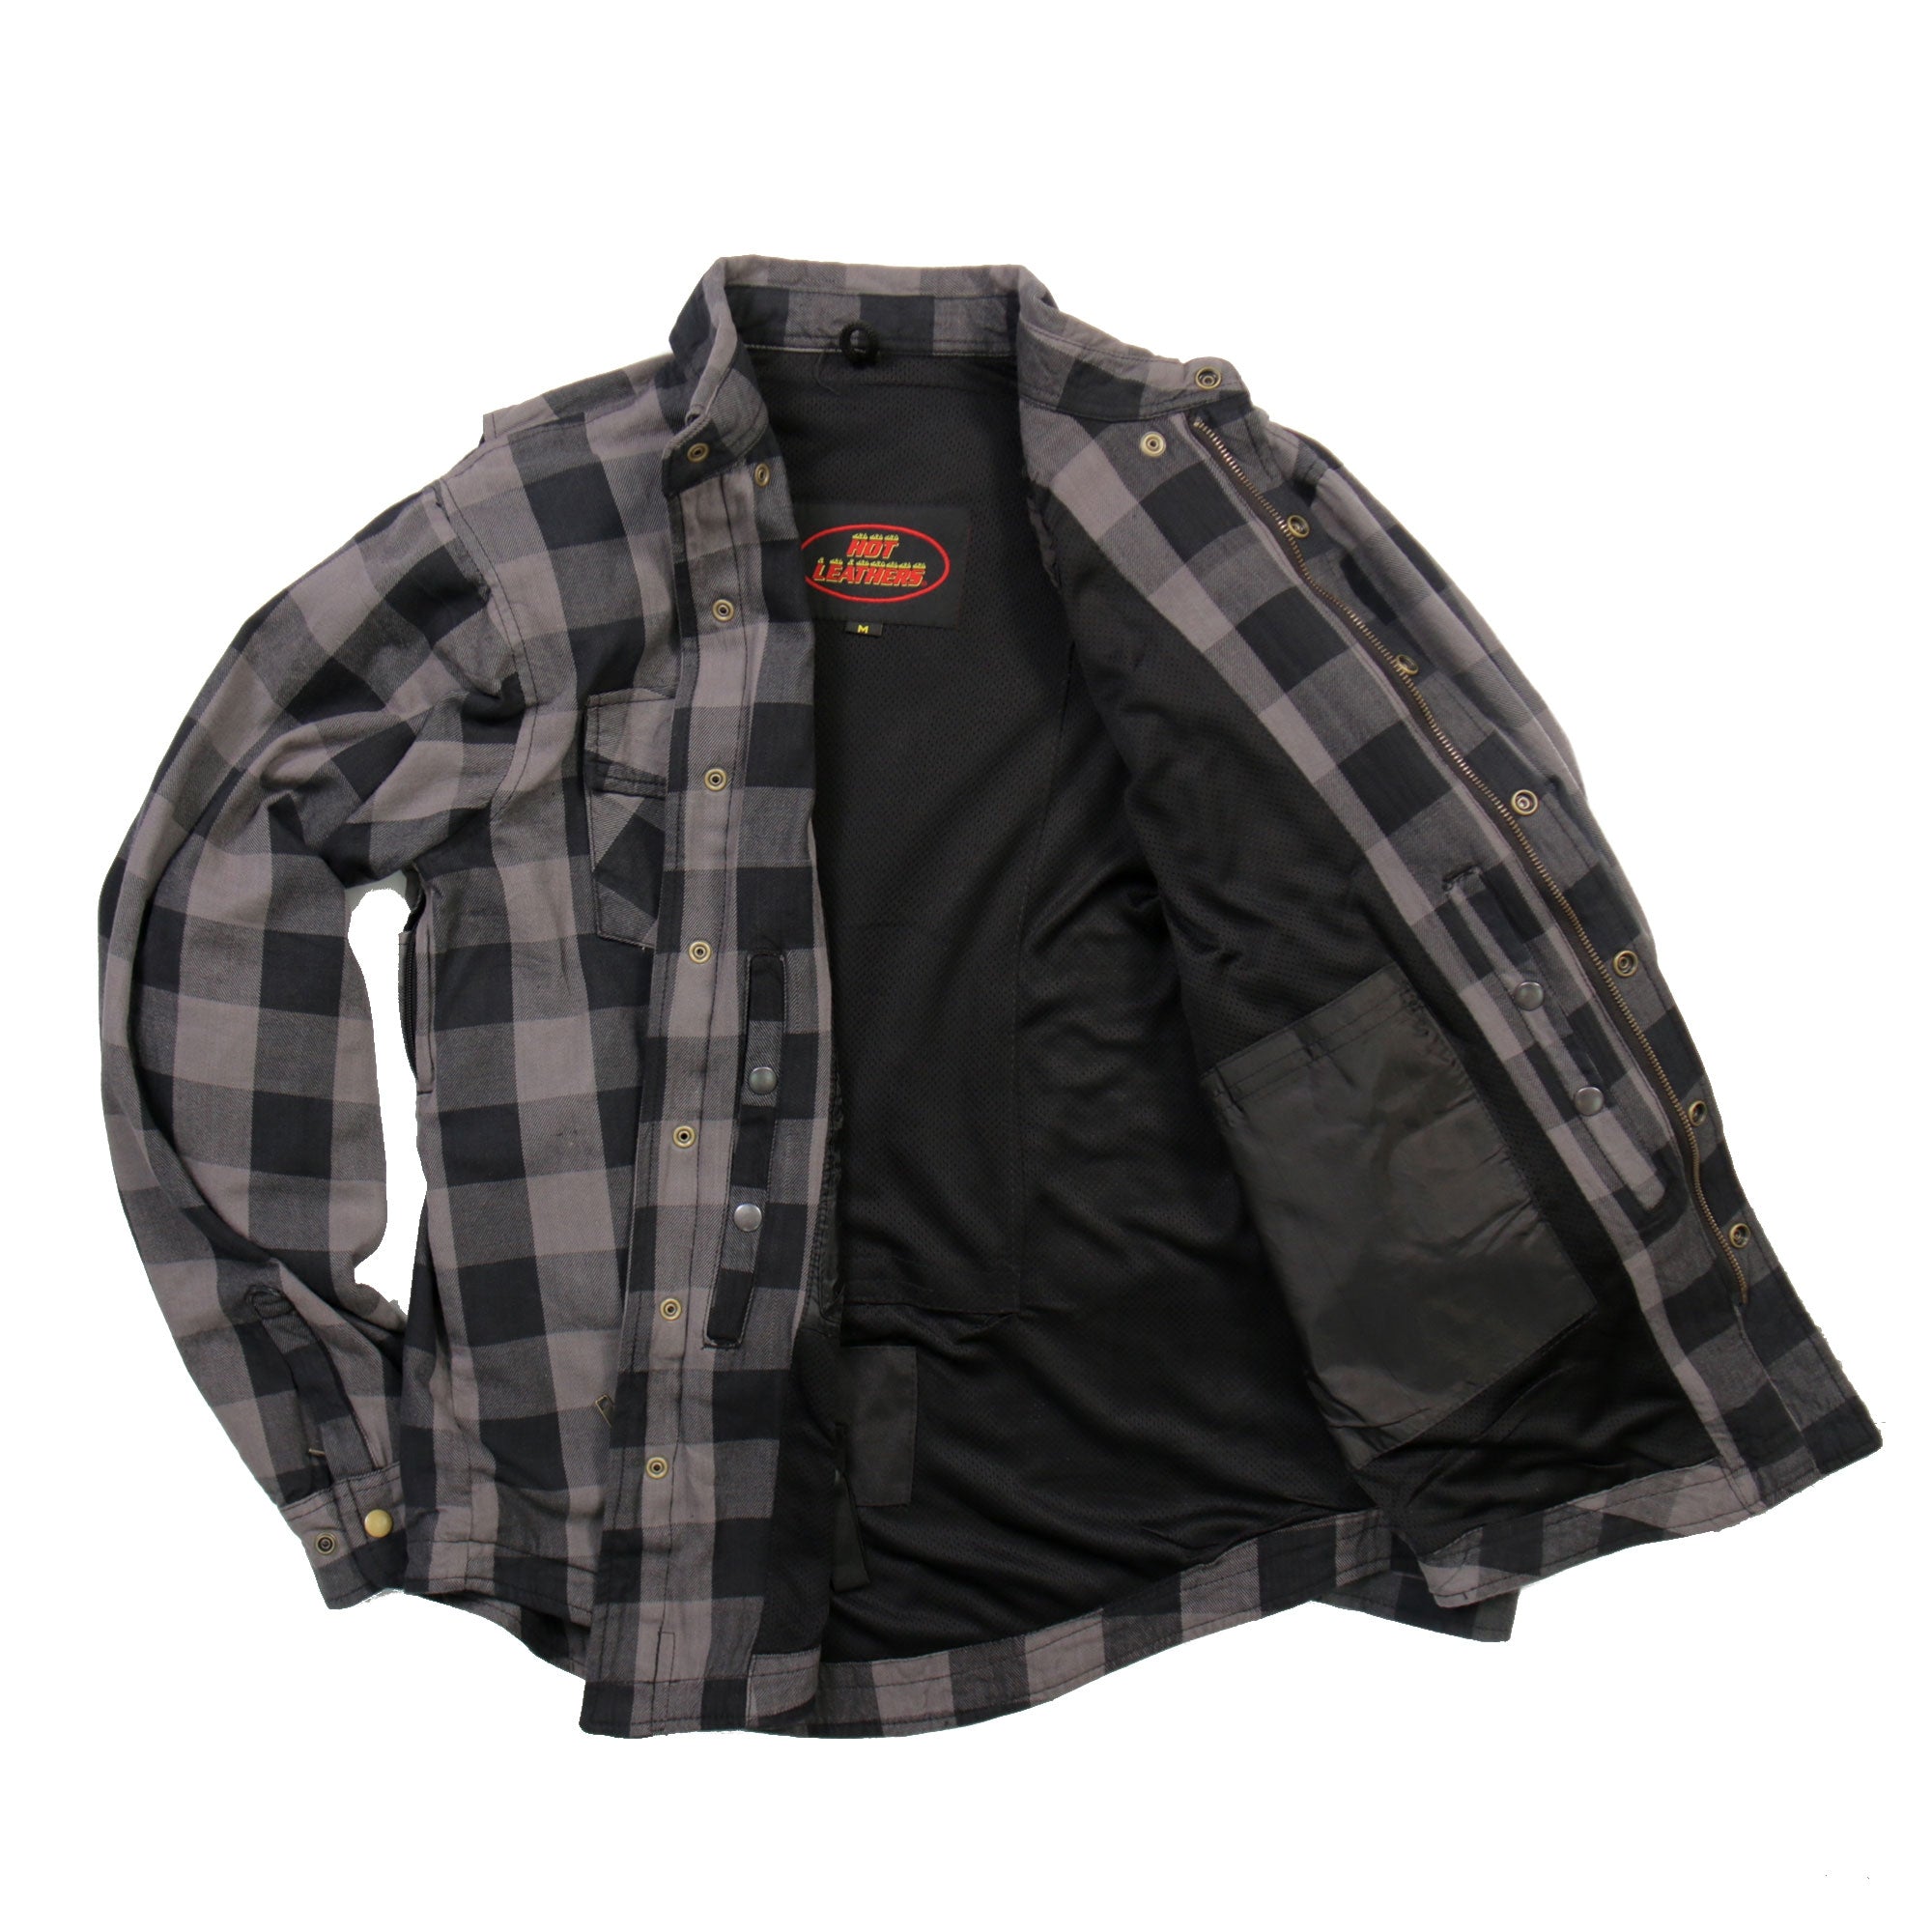 Hot Leathers JKM3004 Men's Motorcycle Grey and Black Armored Flannel Biker Jacket